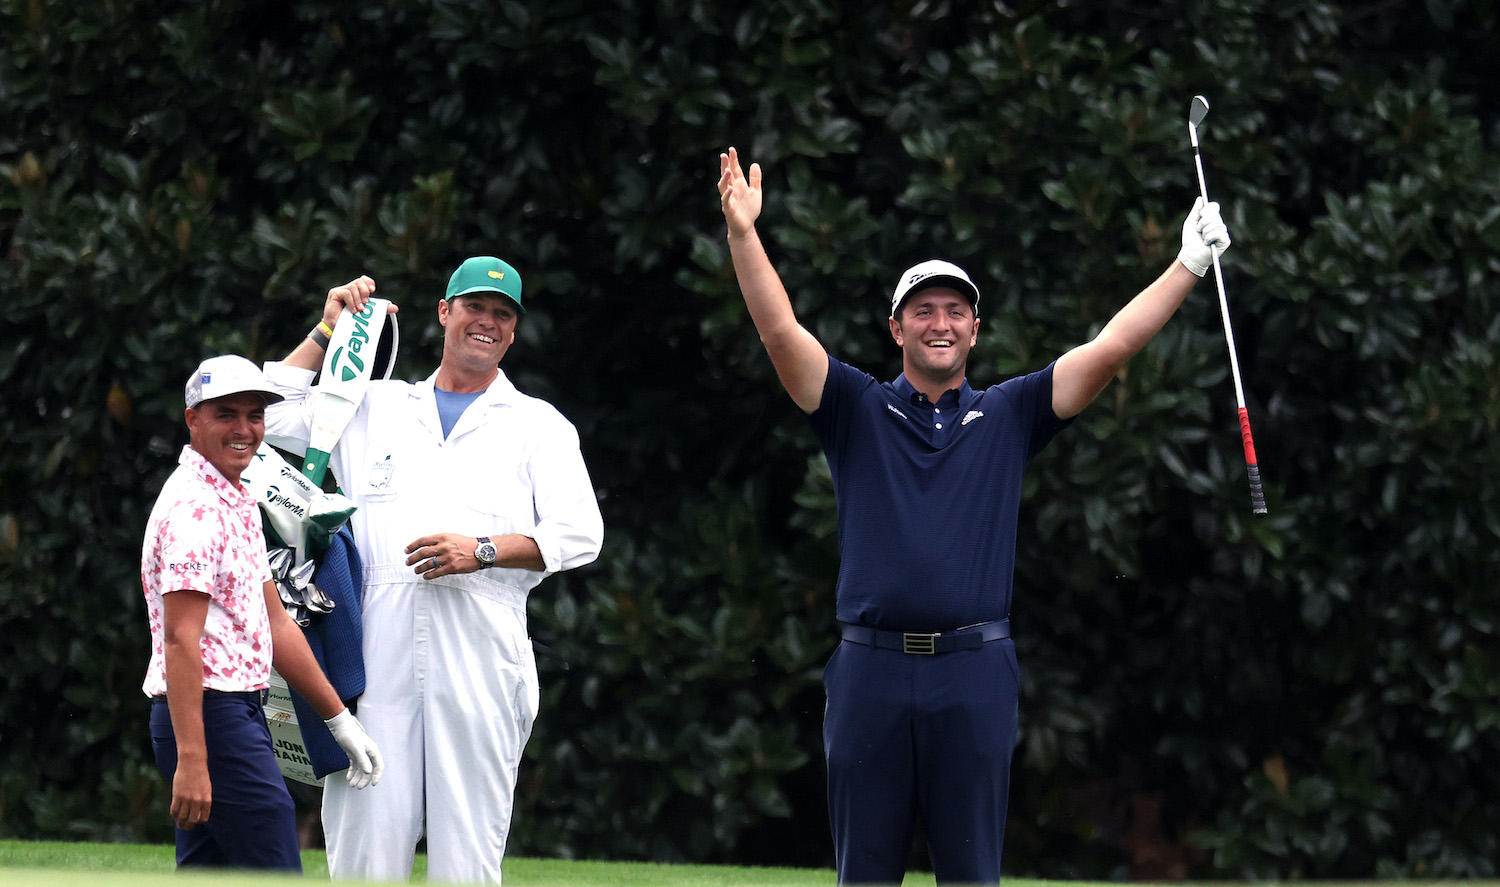 AUGUSTA, GEORGIA - NOVEMBER 10: Jon Rahm of Spain celebrates with Rickie Fowler of the United States after skipping in for a hole in one on the 16th during a practice round prior to the Masters at Augusta National Golf Club on November 10, 2020 in Augusta, Georgia. (Photo by Rob Carr/Getty Images)